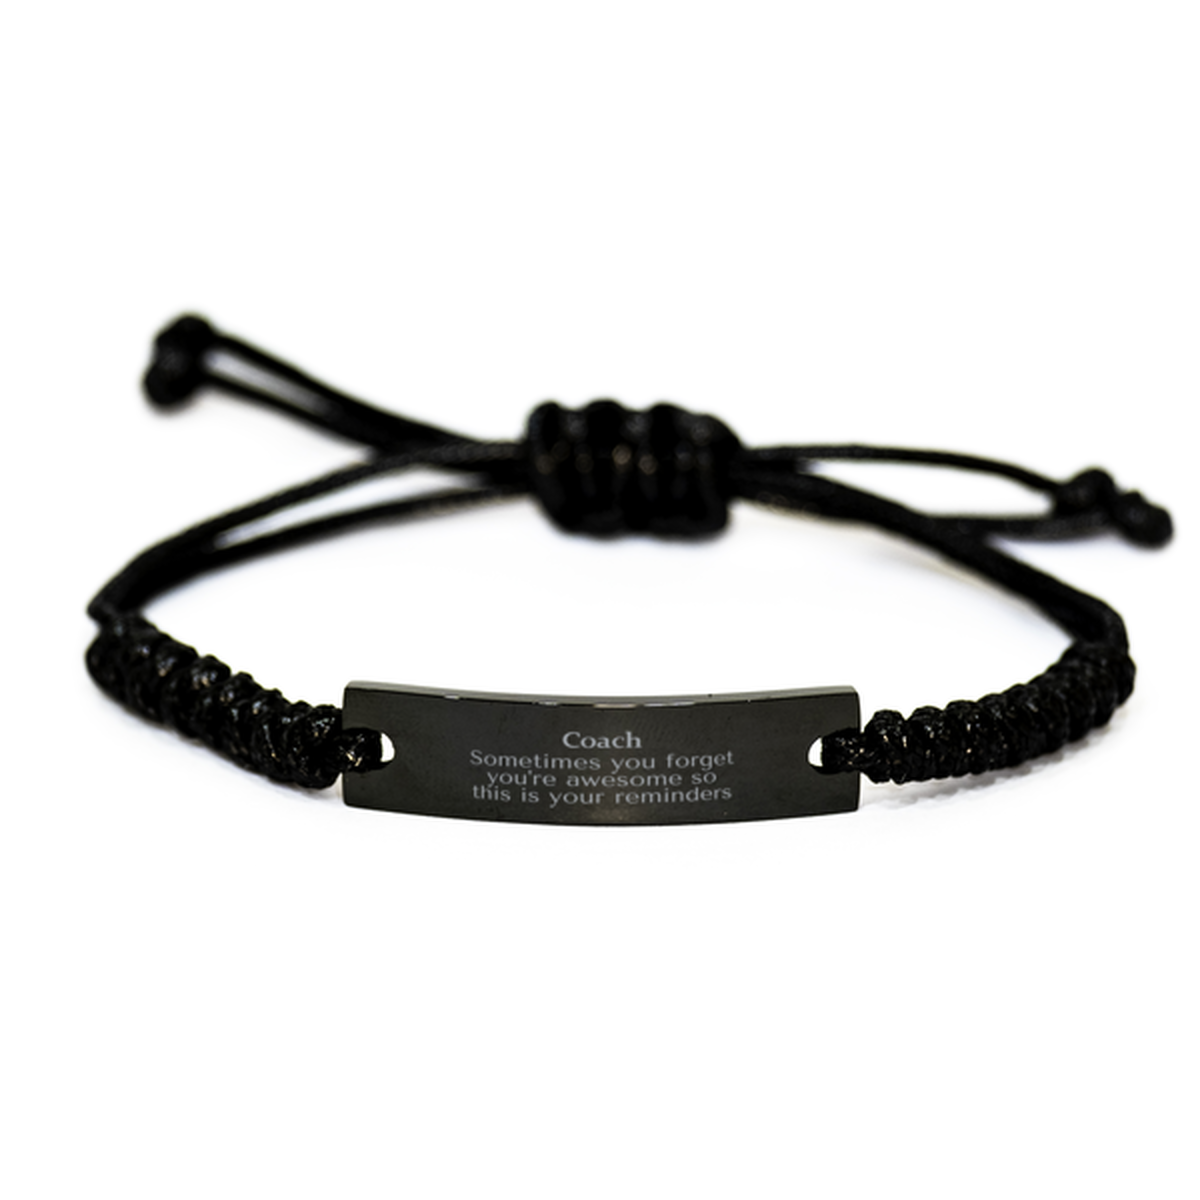 Sentimental Coach Black Rope Bracelet, Coach Sometimes you forget you're awesome so this is your reminders, Graduation Christmas Birthday Gifts for Coach, Men, Women, Coworkers